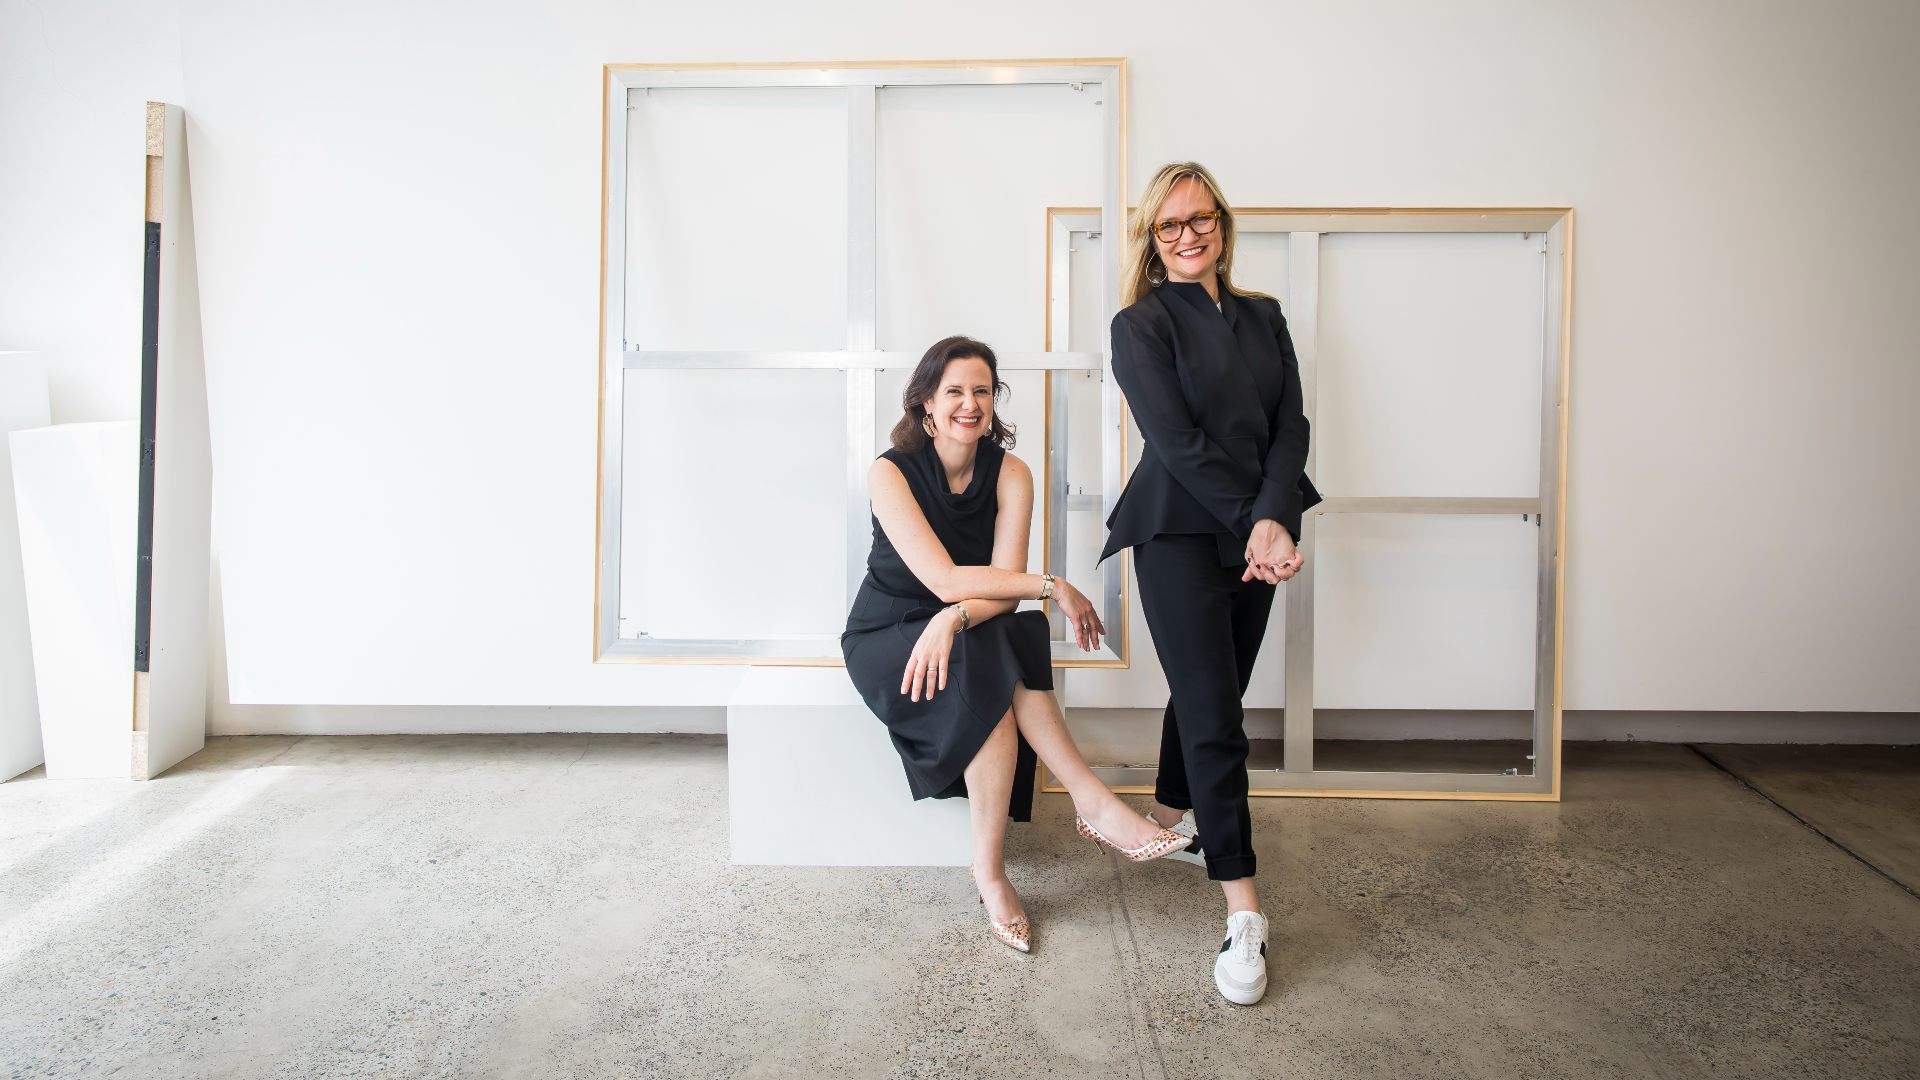 Sydney's Renowned Contemporary Art Gallery Sullivan+Strumpf Is Opening in Melbourne This Spring